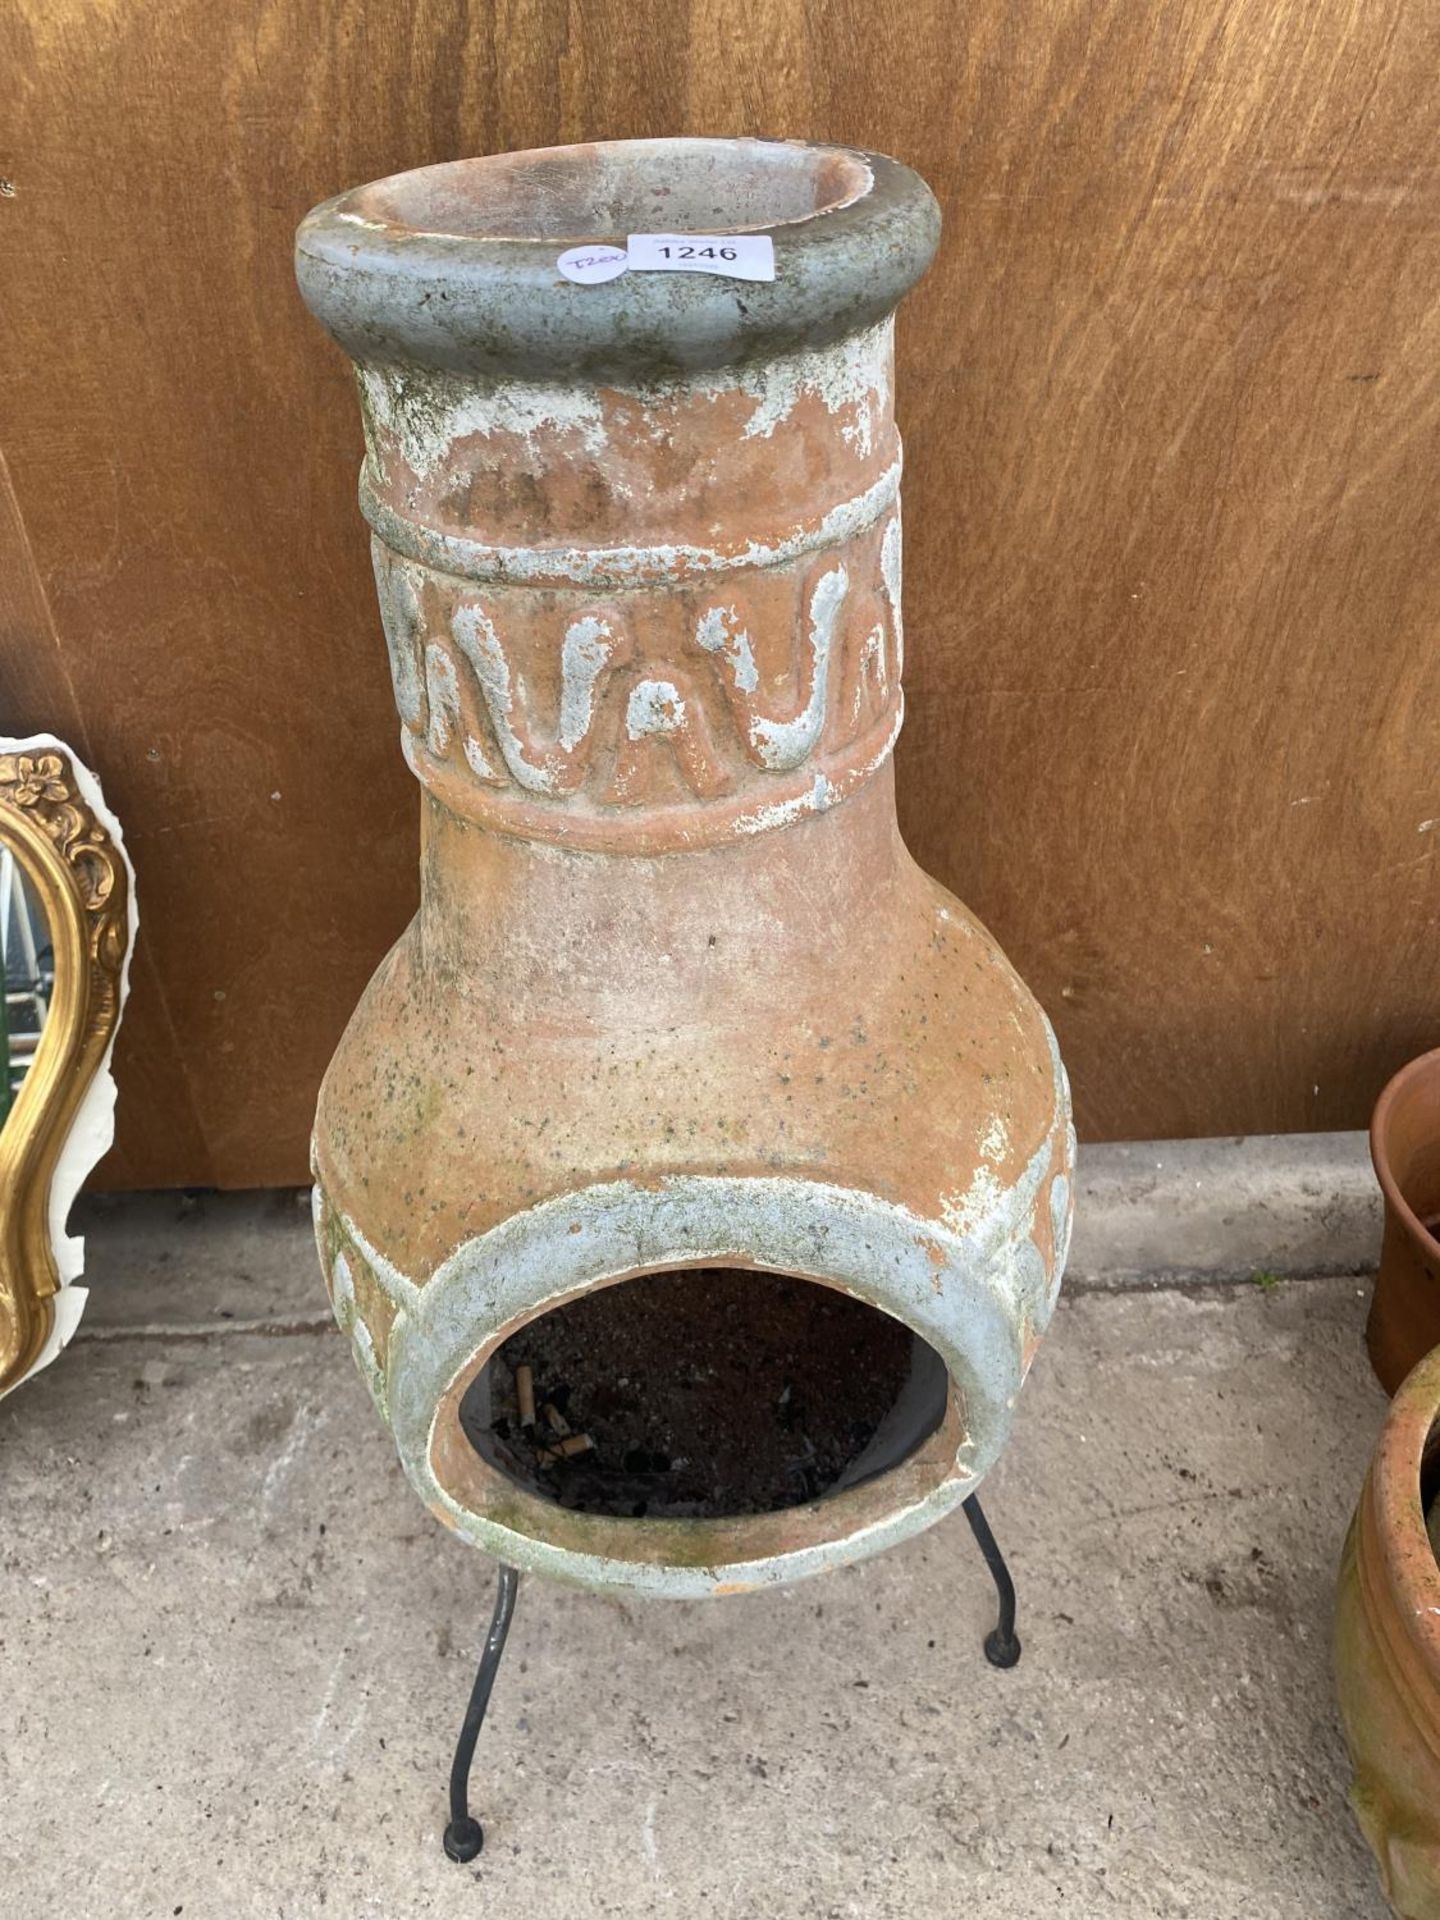 A TERRACOTTA CHIMENEA WITH METAL STAND